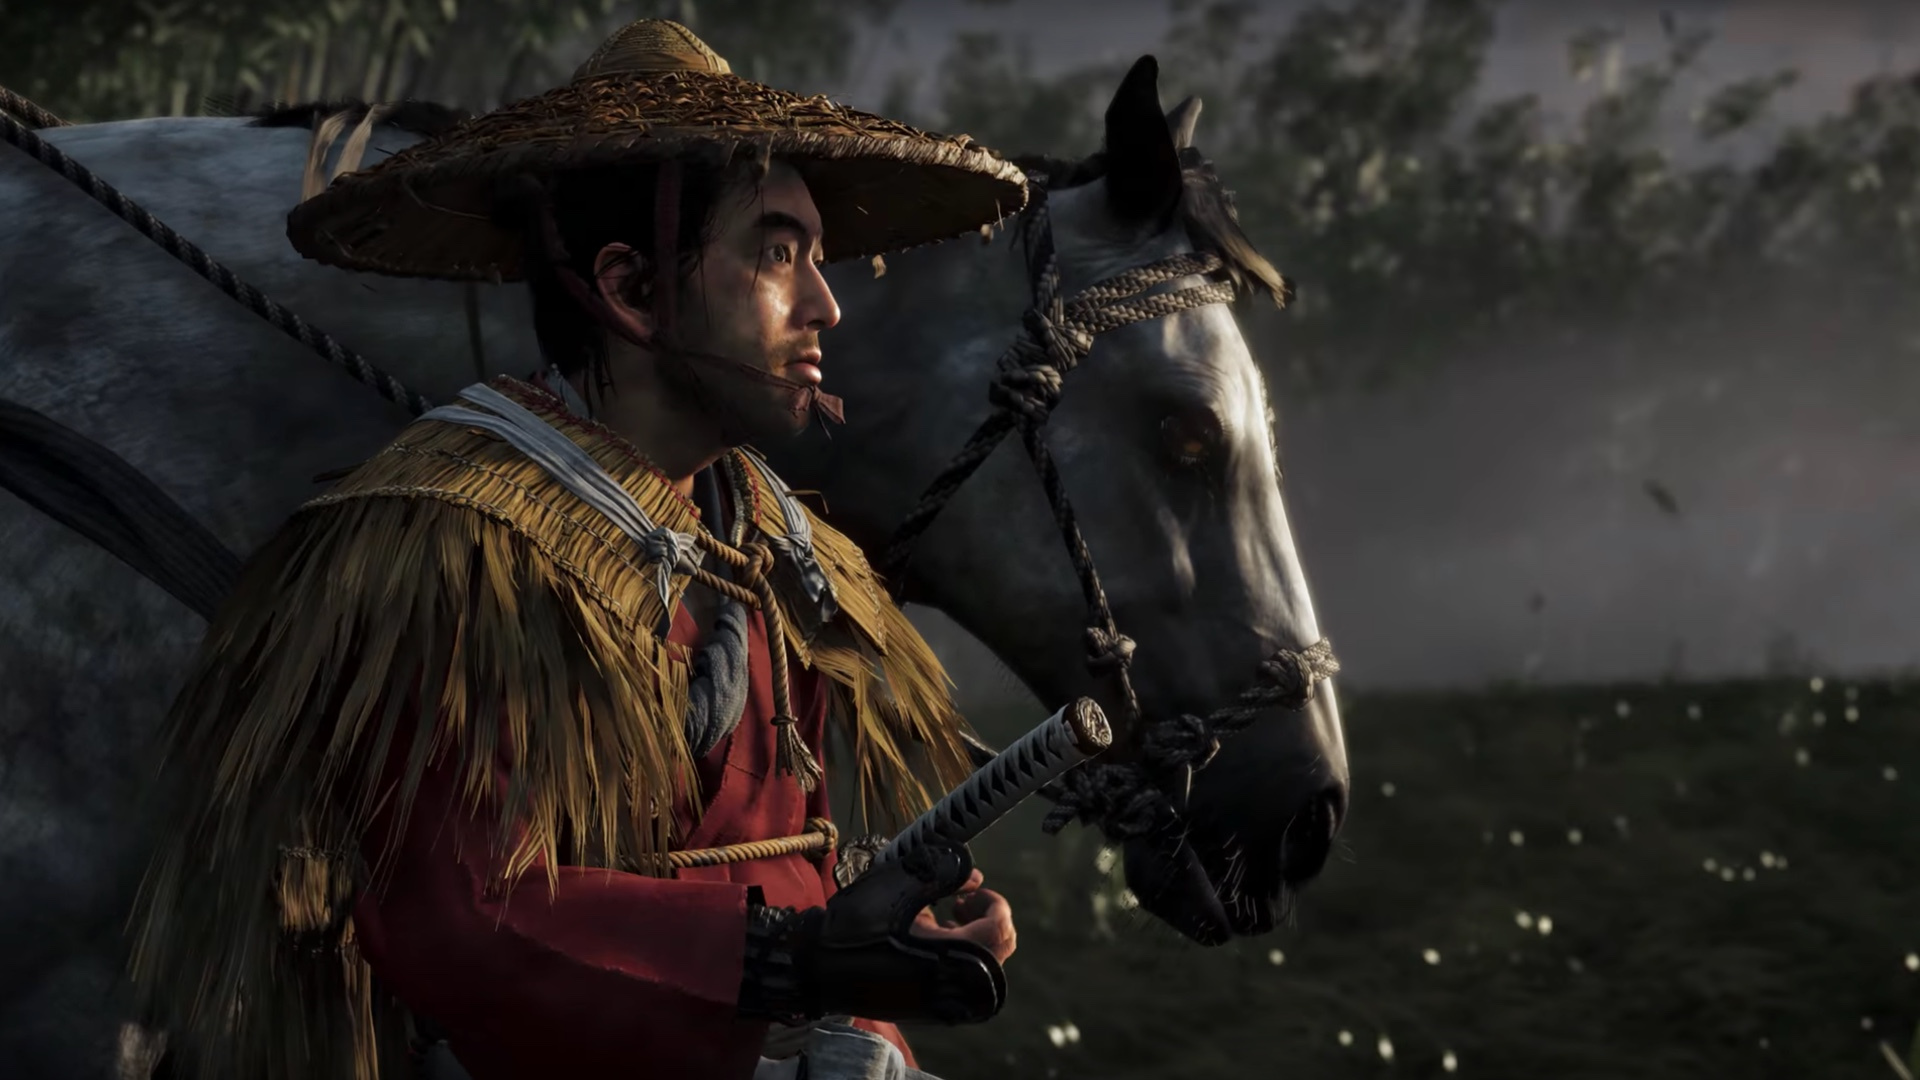 http://images.pushsquare.com/e5854b50fcc27/ghost-of-tsushima-state-of-play-ps4-playstation-4-1.original.jpg